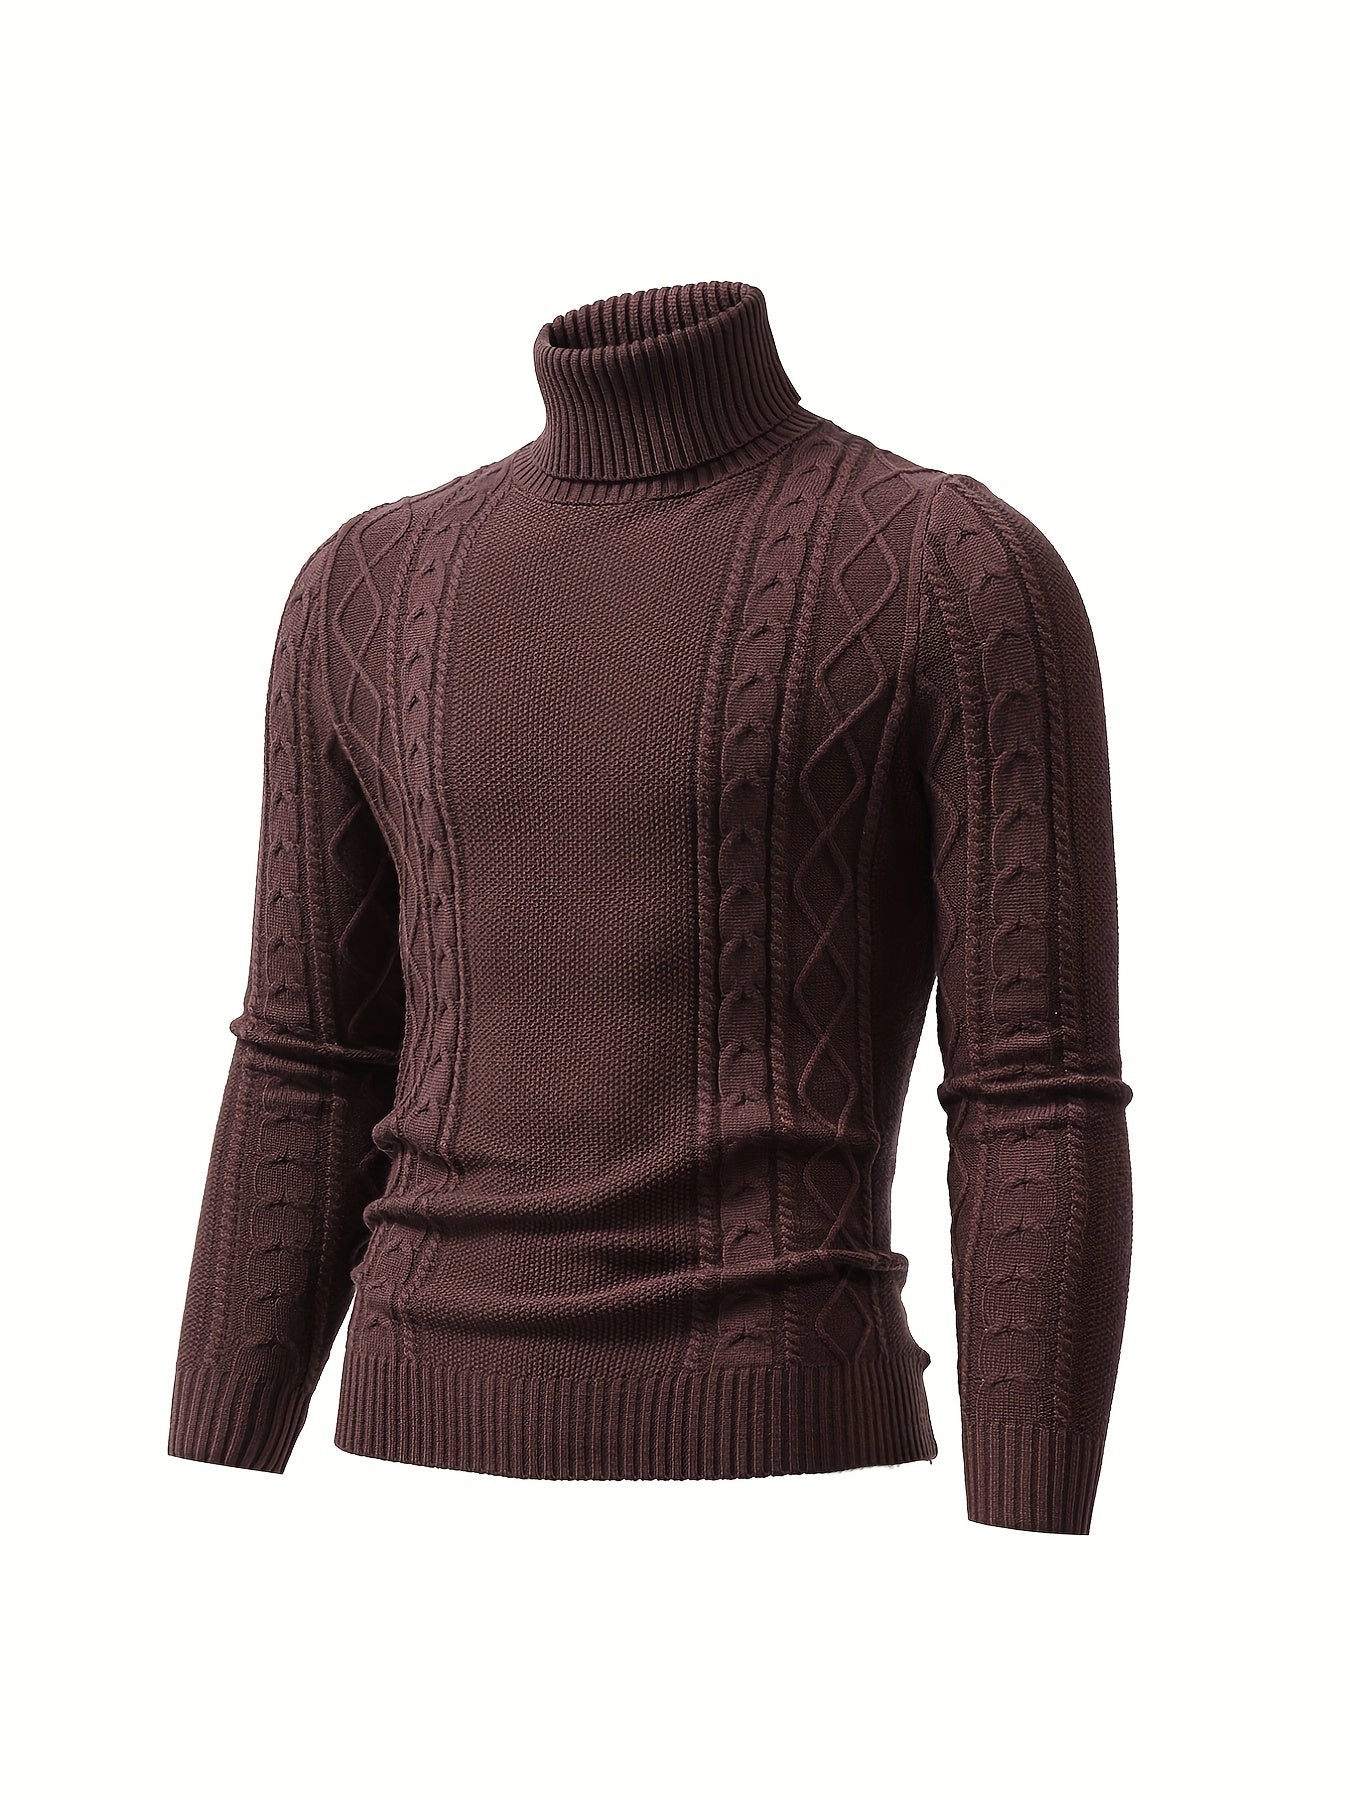 Foruwish - Men's Plain Turtleneck Sweater, Trendy High Stretch Fashion Comfy Thermal Tops